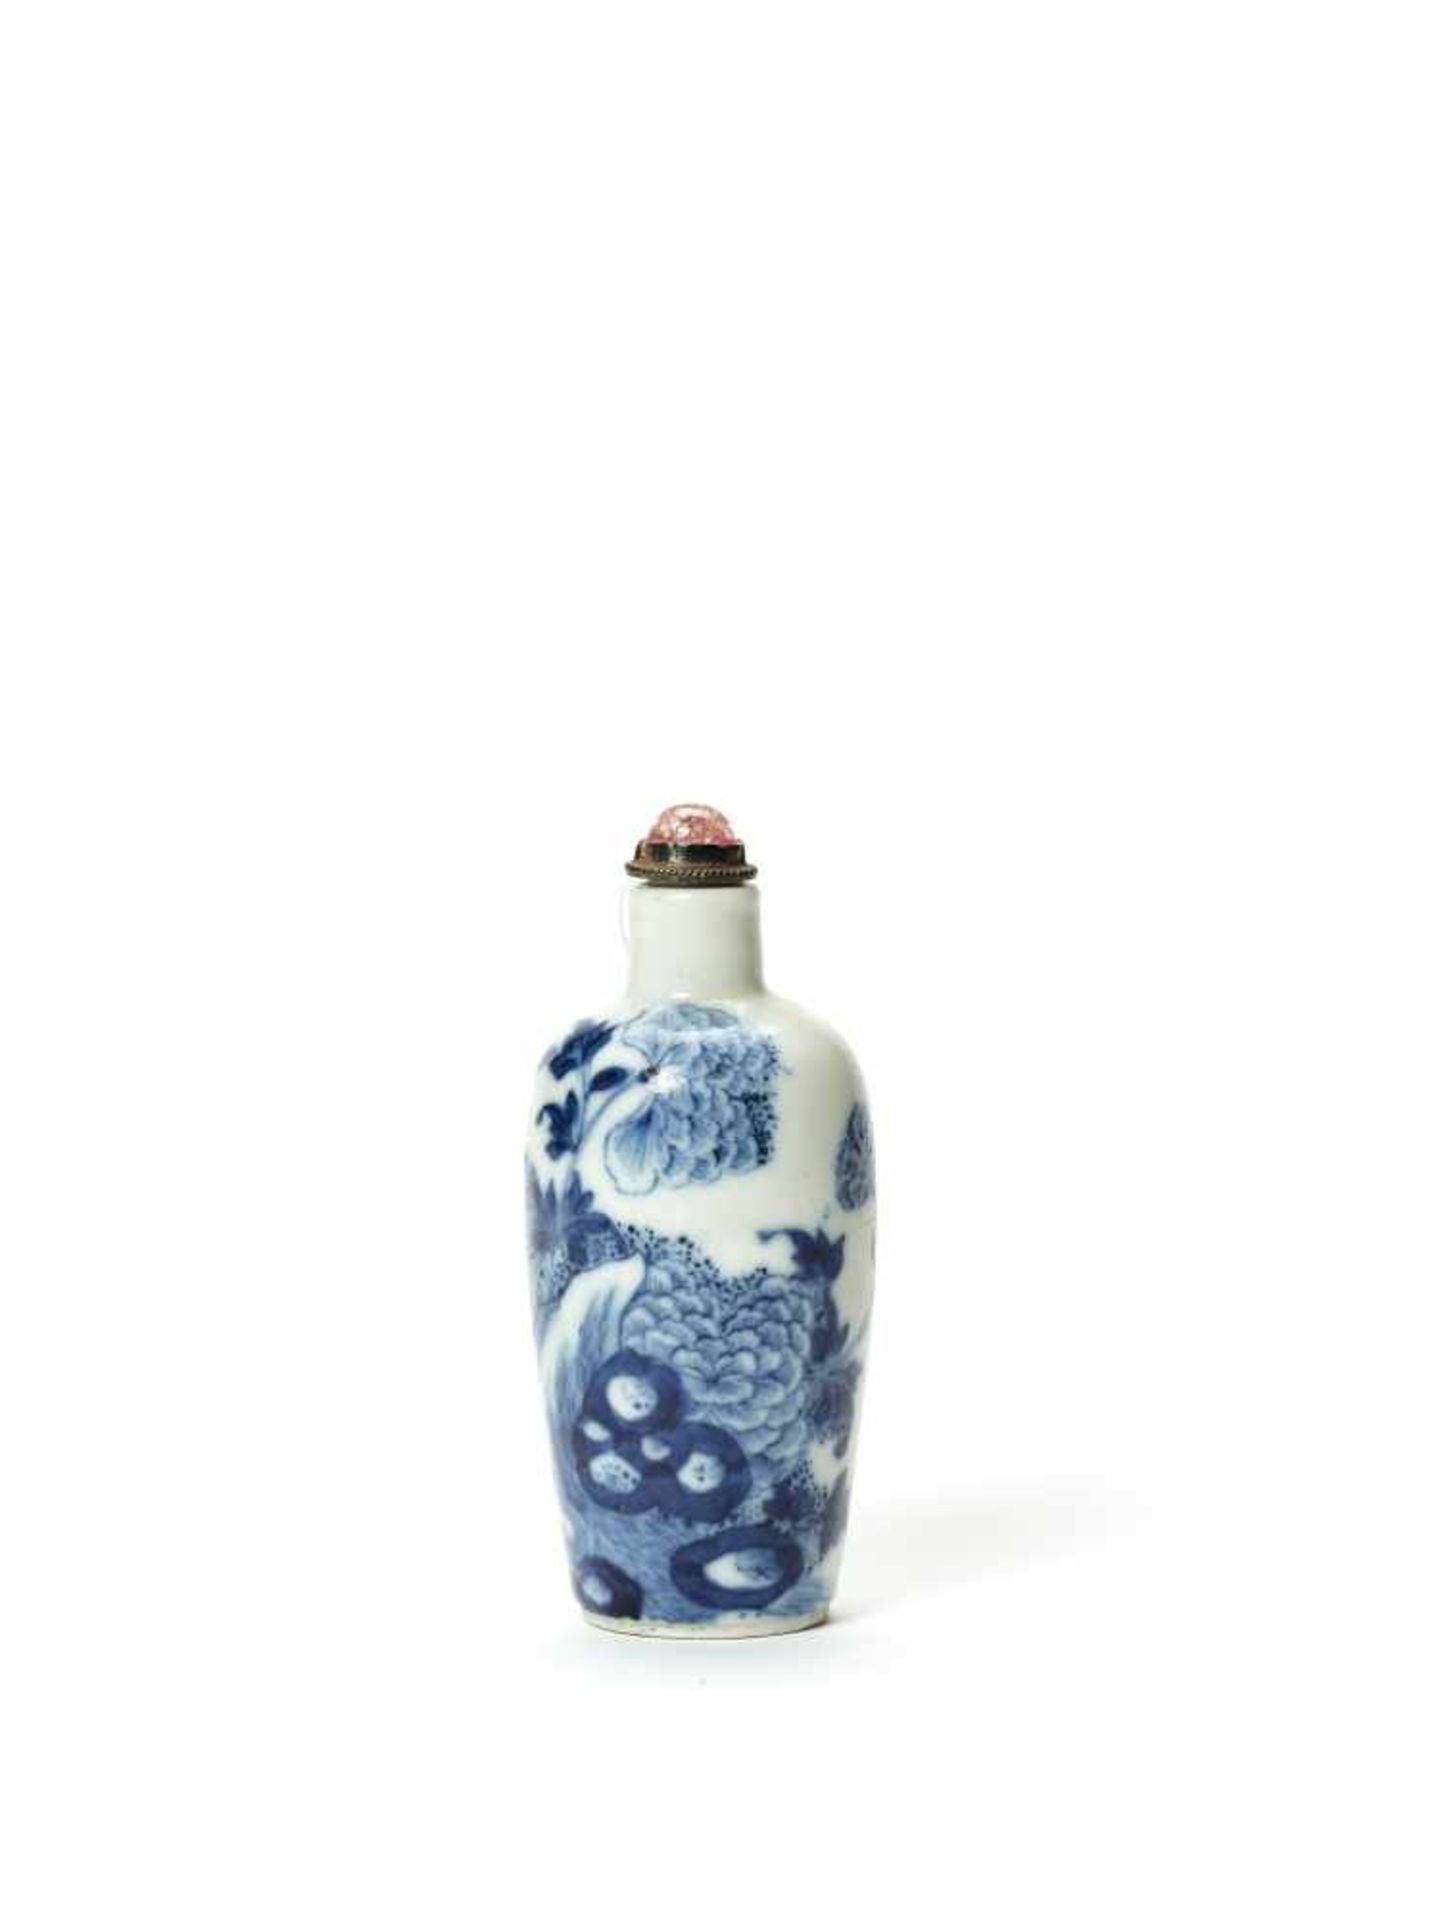 A DAOGUANG PERIOD BLUE AND WHITE ‘CHRYSANTHEMUM’ PORCELAIN SNUFF BOTTLEPorcelainChina, Daoguang